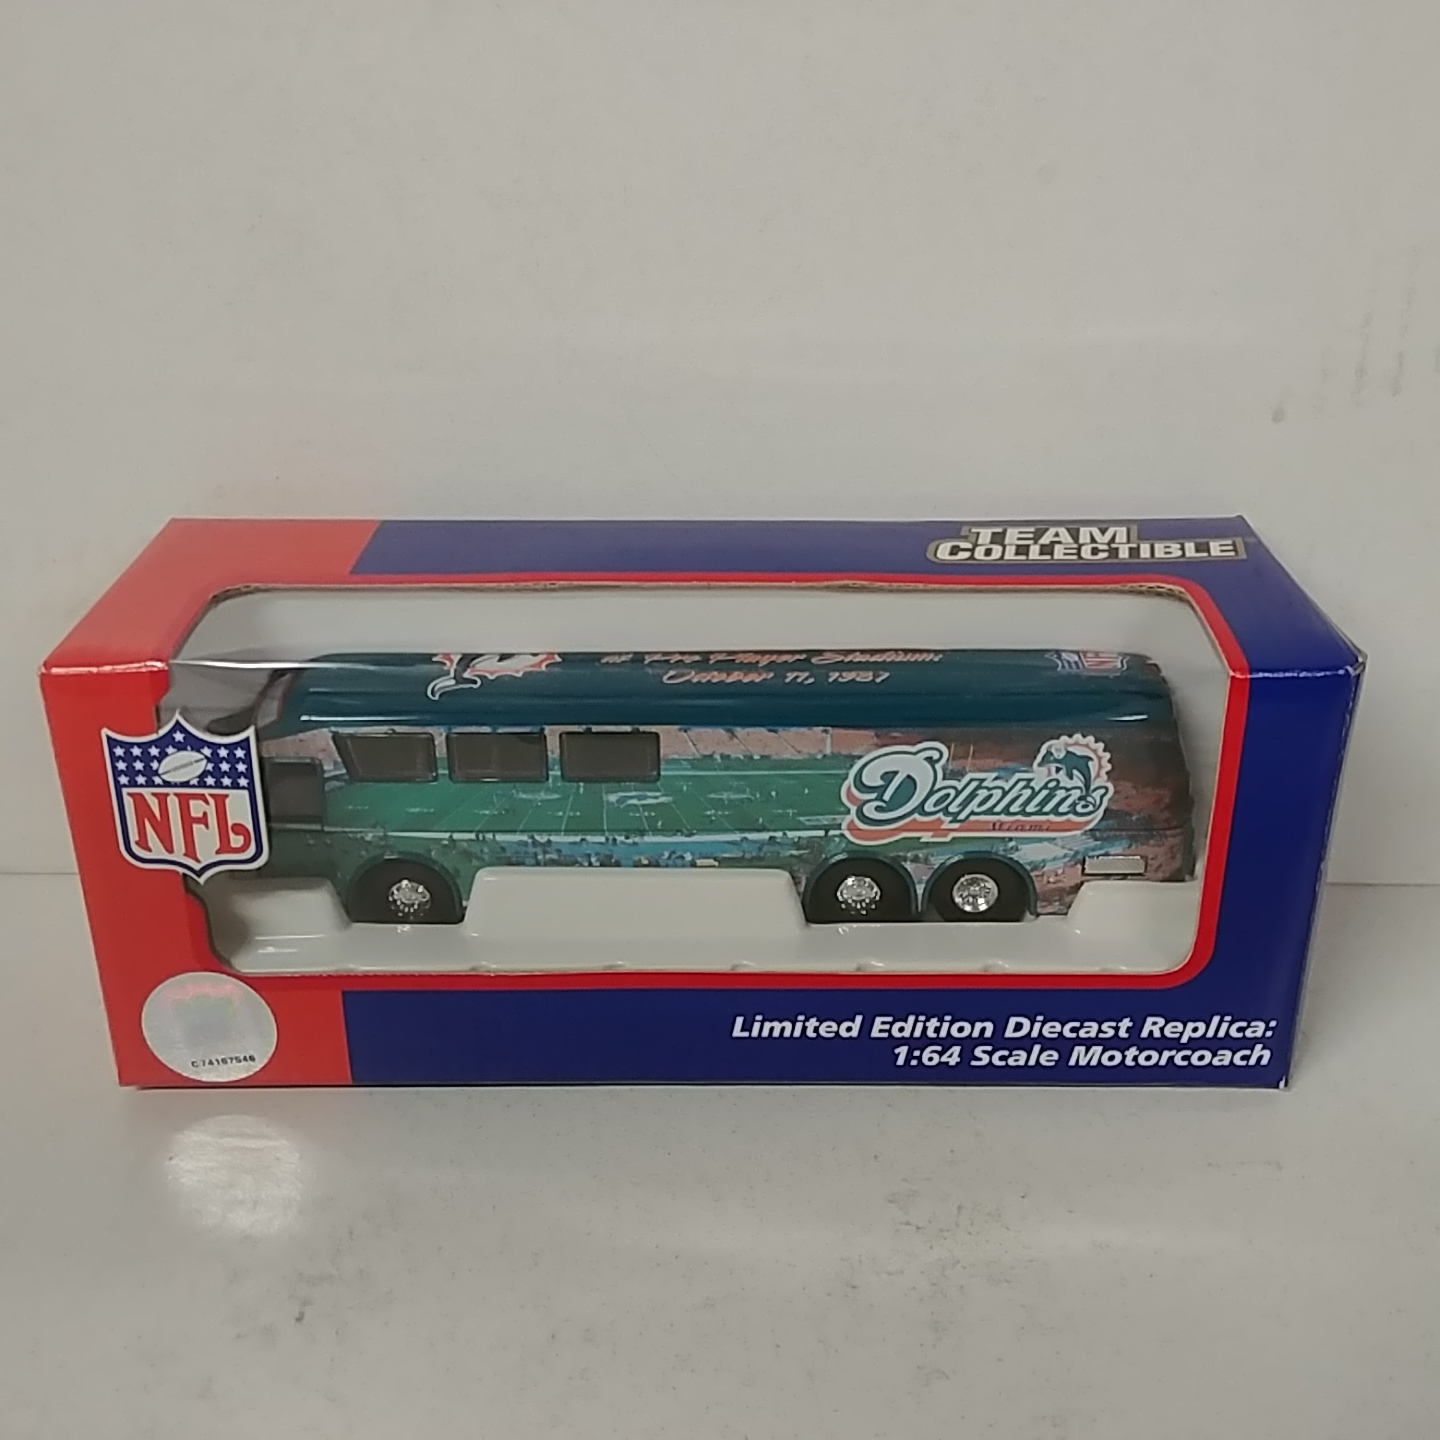 2001 Miami Dolphins 1/64th Motorcoach